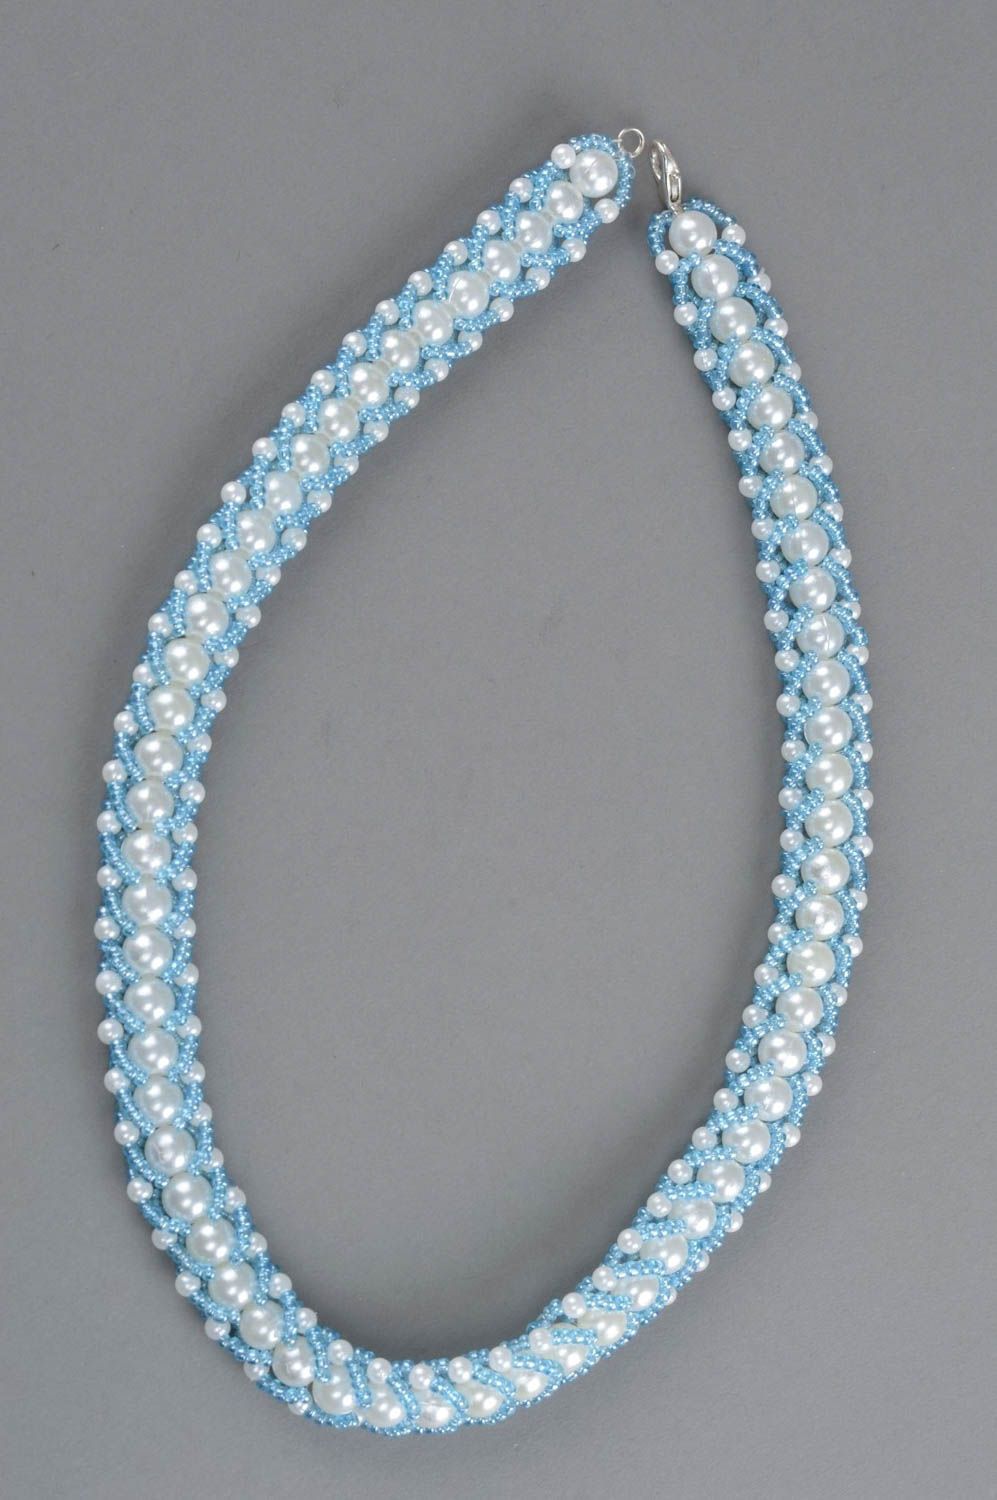 Handmade beaded necklace white and blue accessory everyday jewelry for women photo 2